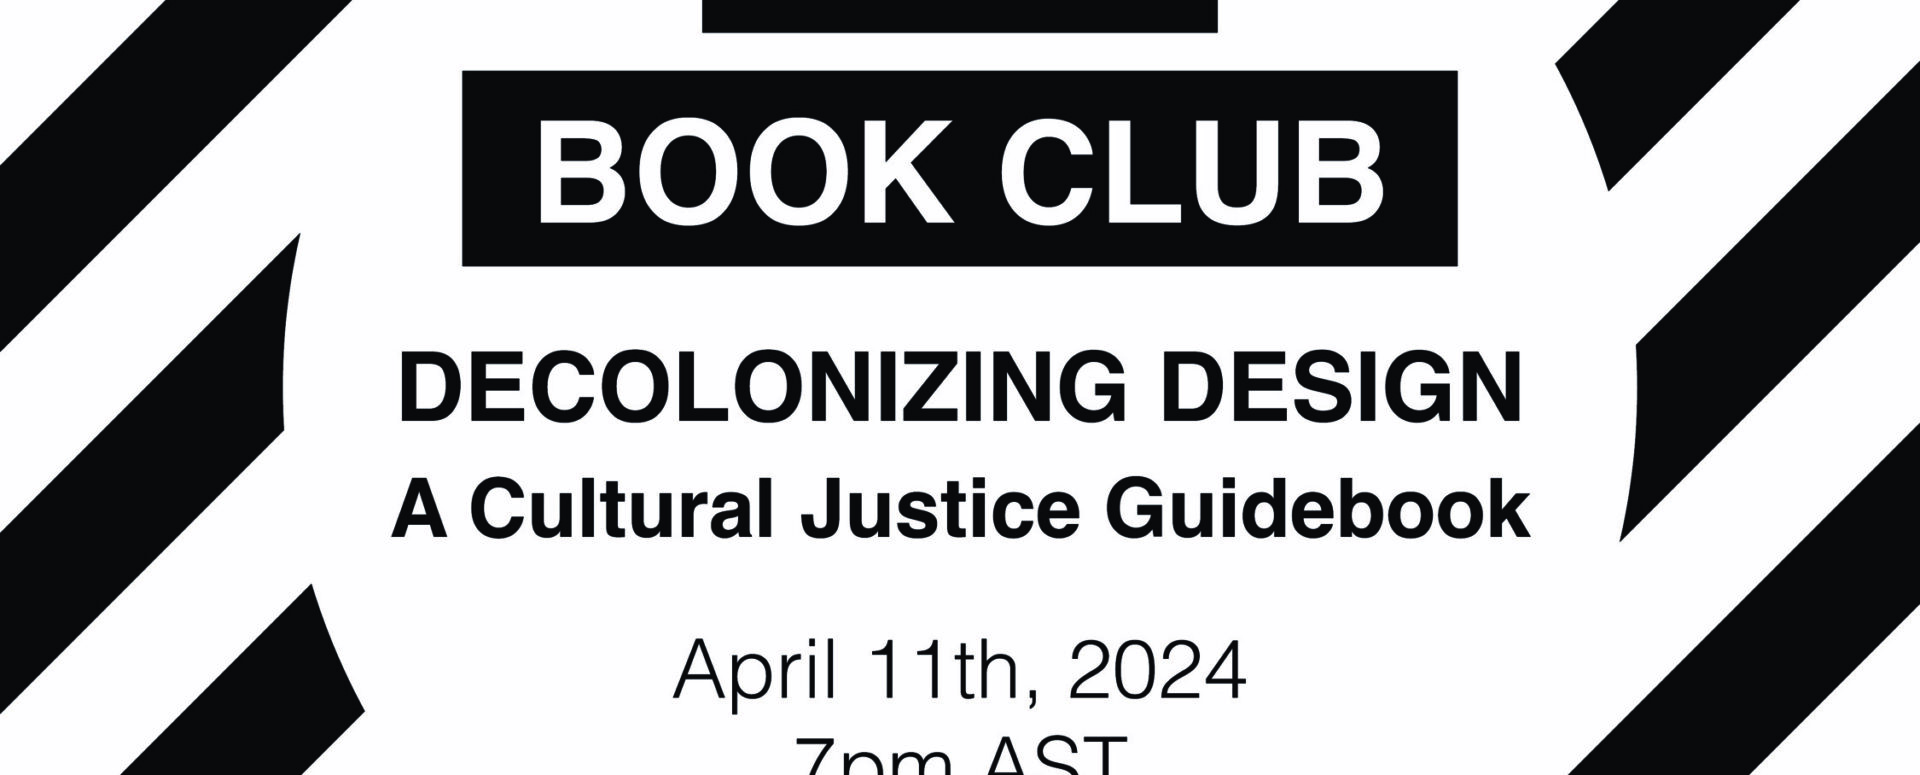 Black and white graphic with diagonal black stripes in the background and a white circle centered in the foreground. Text on the white circle reads: BEAA Book Club Decolonizing Design: A cultural justice guidebook April 11th 2024, 7pm AST 7:30 pm NST